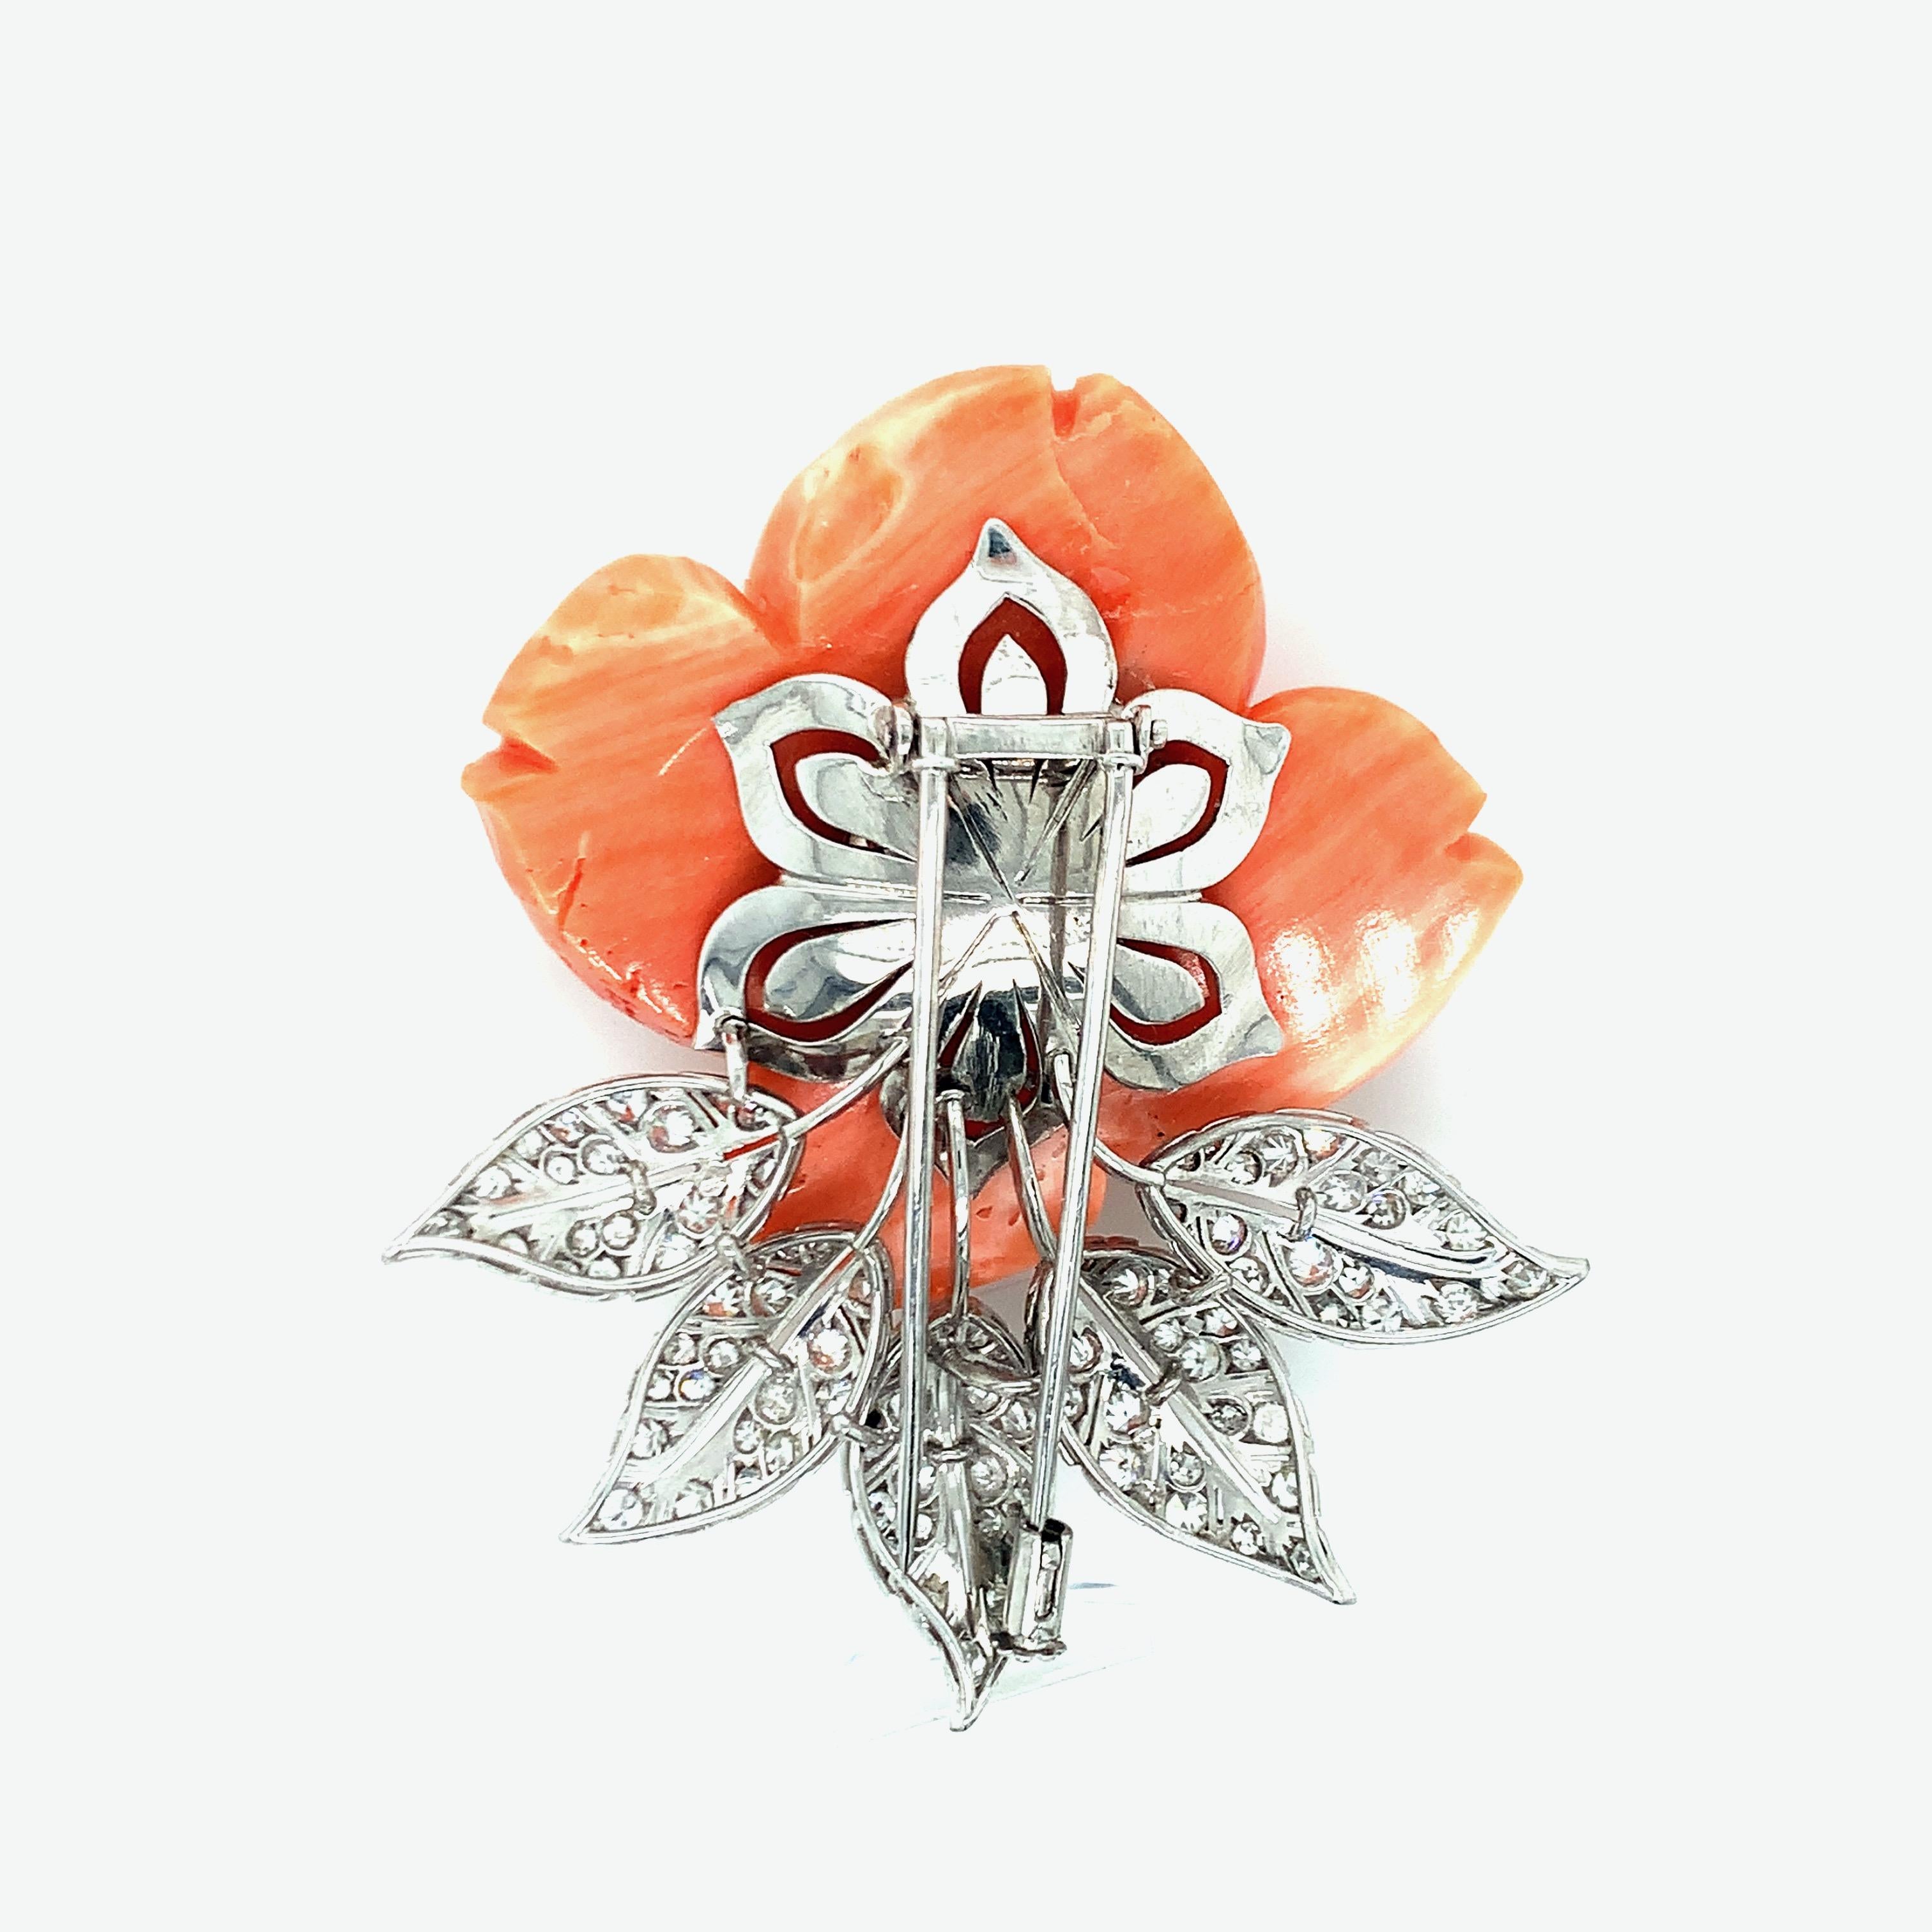 An eye-catching piece of jewelry, this brooch features a rose made of coral with diamonds weighing approximately 4 carats set in platinum leaves. Total weight: 38.4 grams. Length: 2.5 inches. Width: 2.13 inches. 